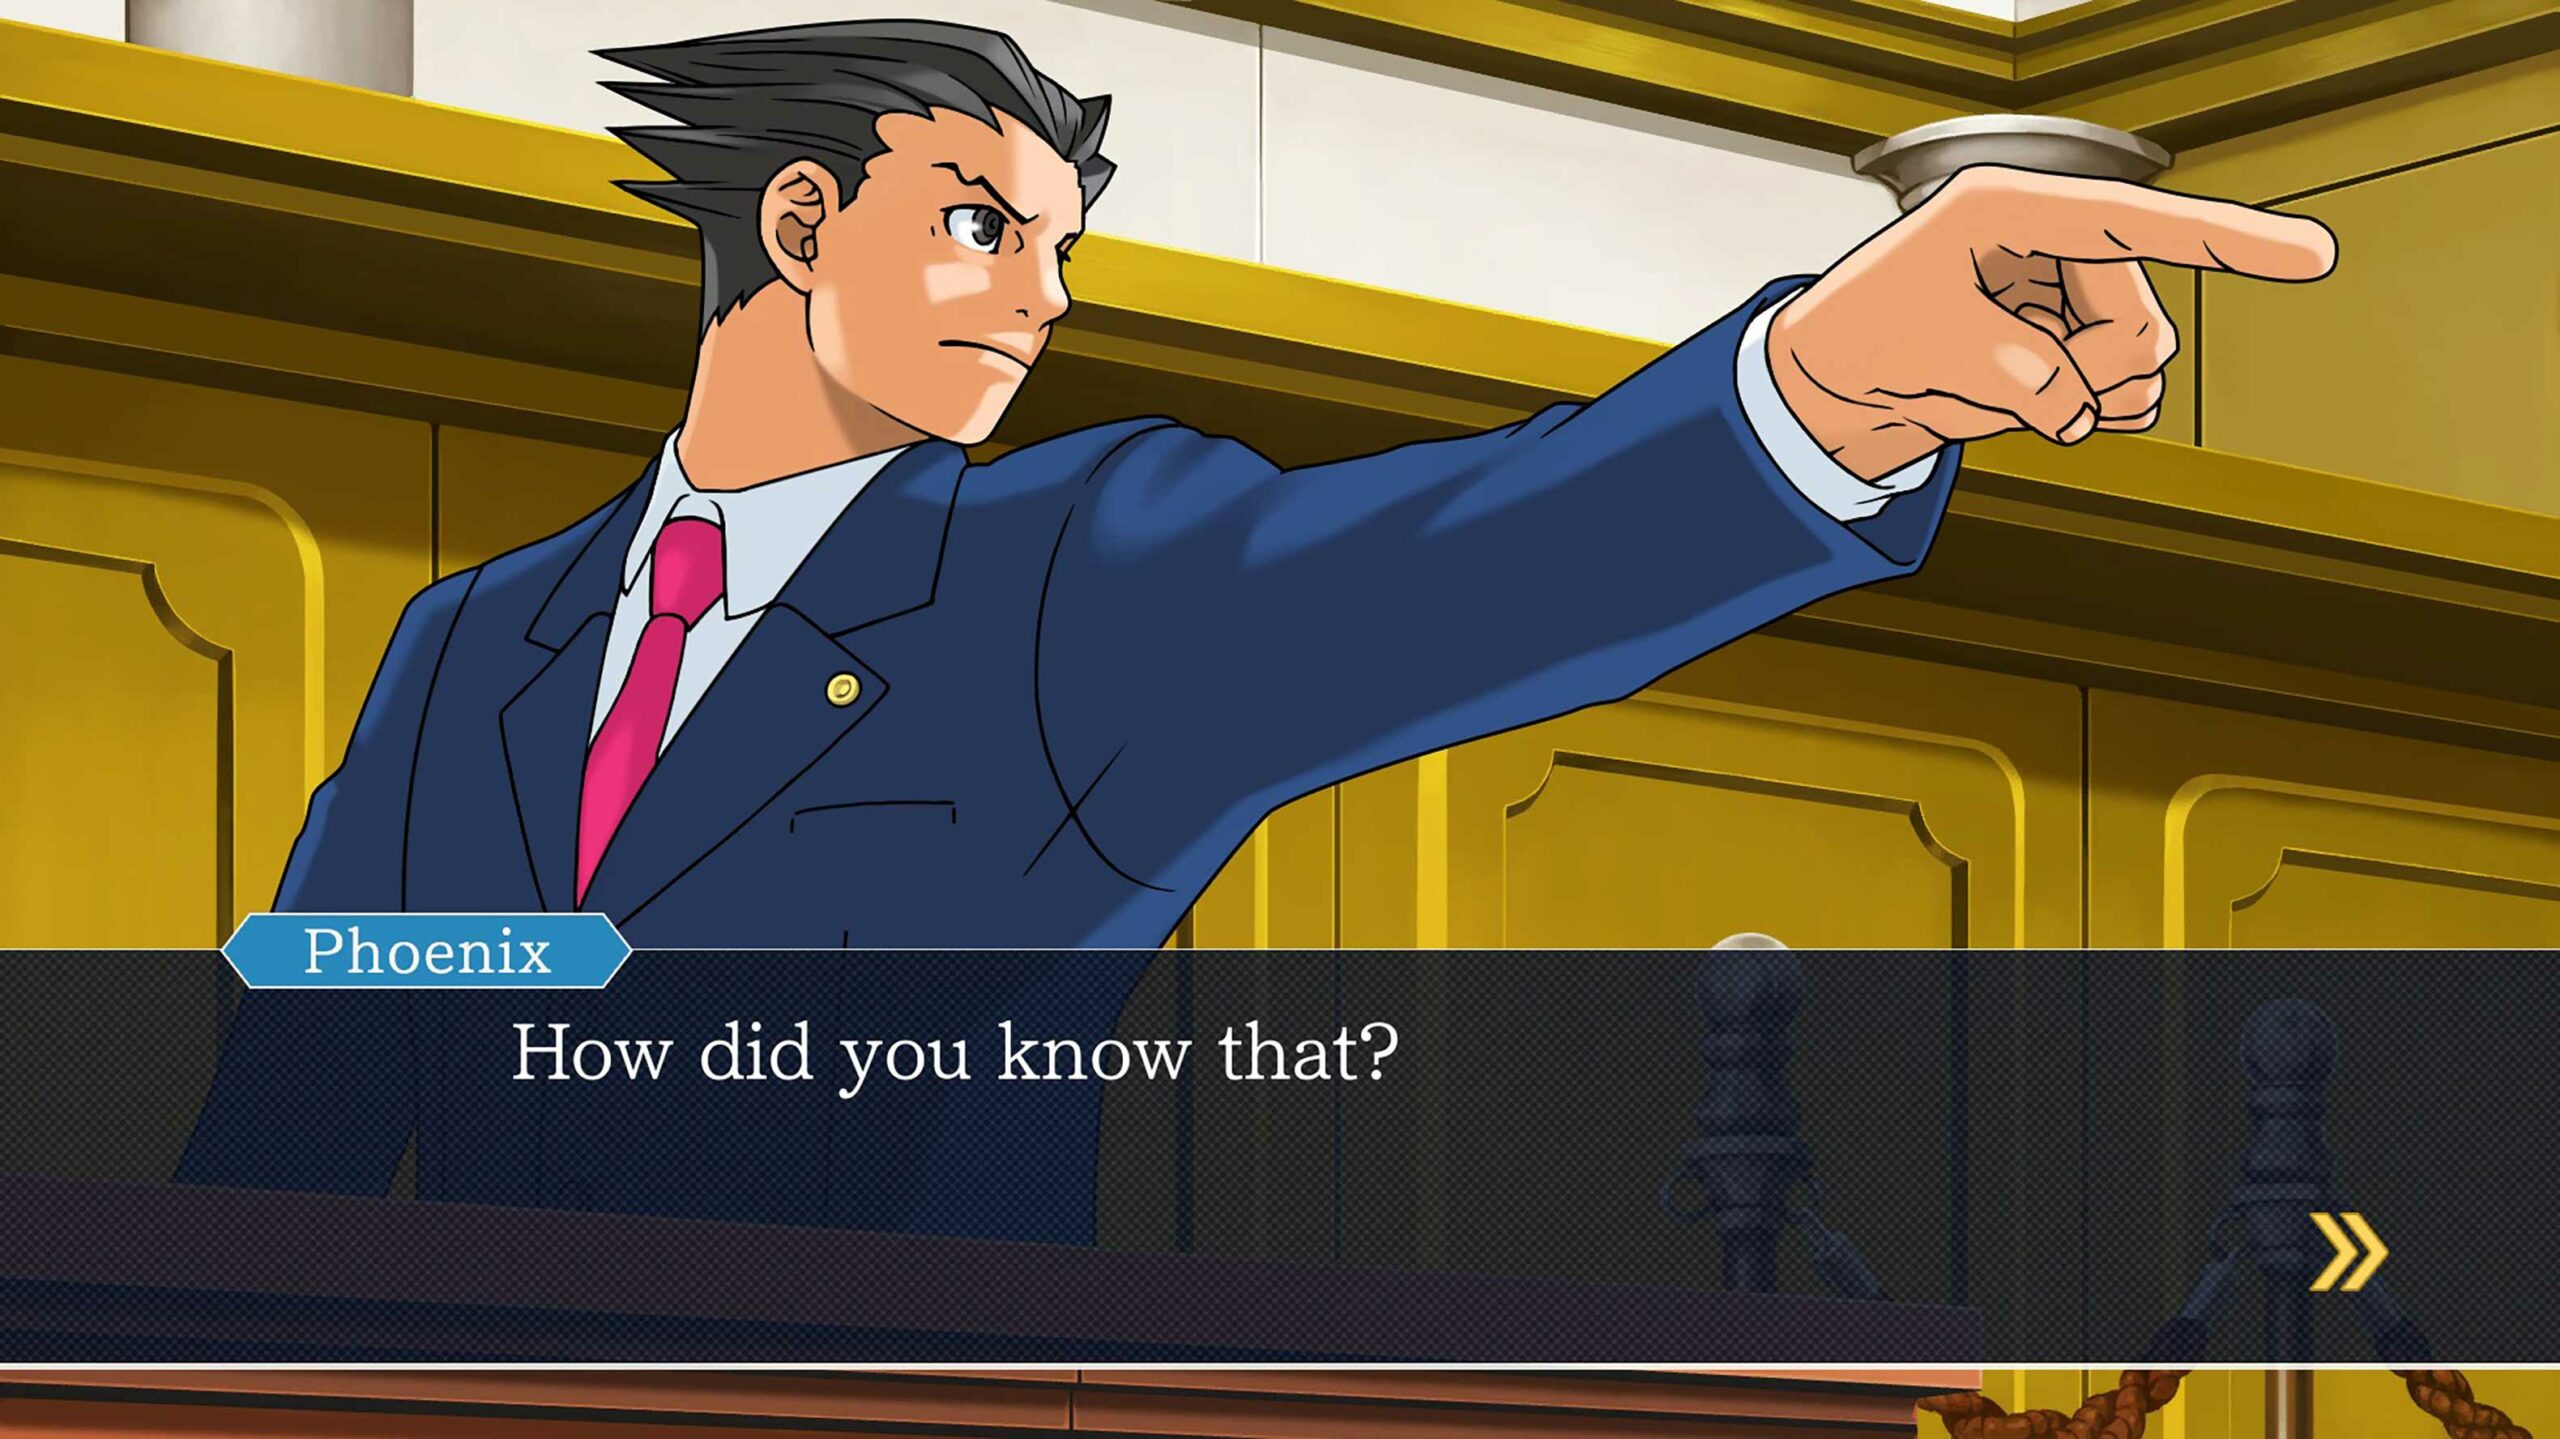 Phoenix Wright: Ace Attorney Trilogy -- Phoenix is doing his classic pointing pose in court while asking "how did you know that?"